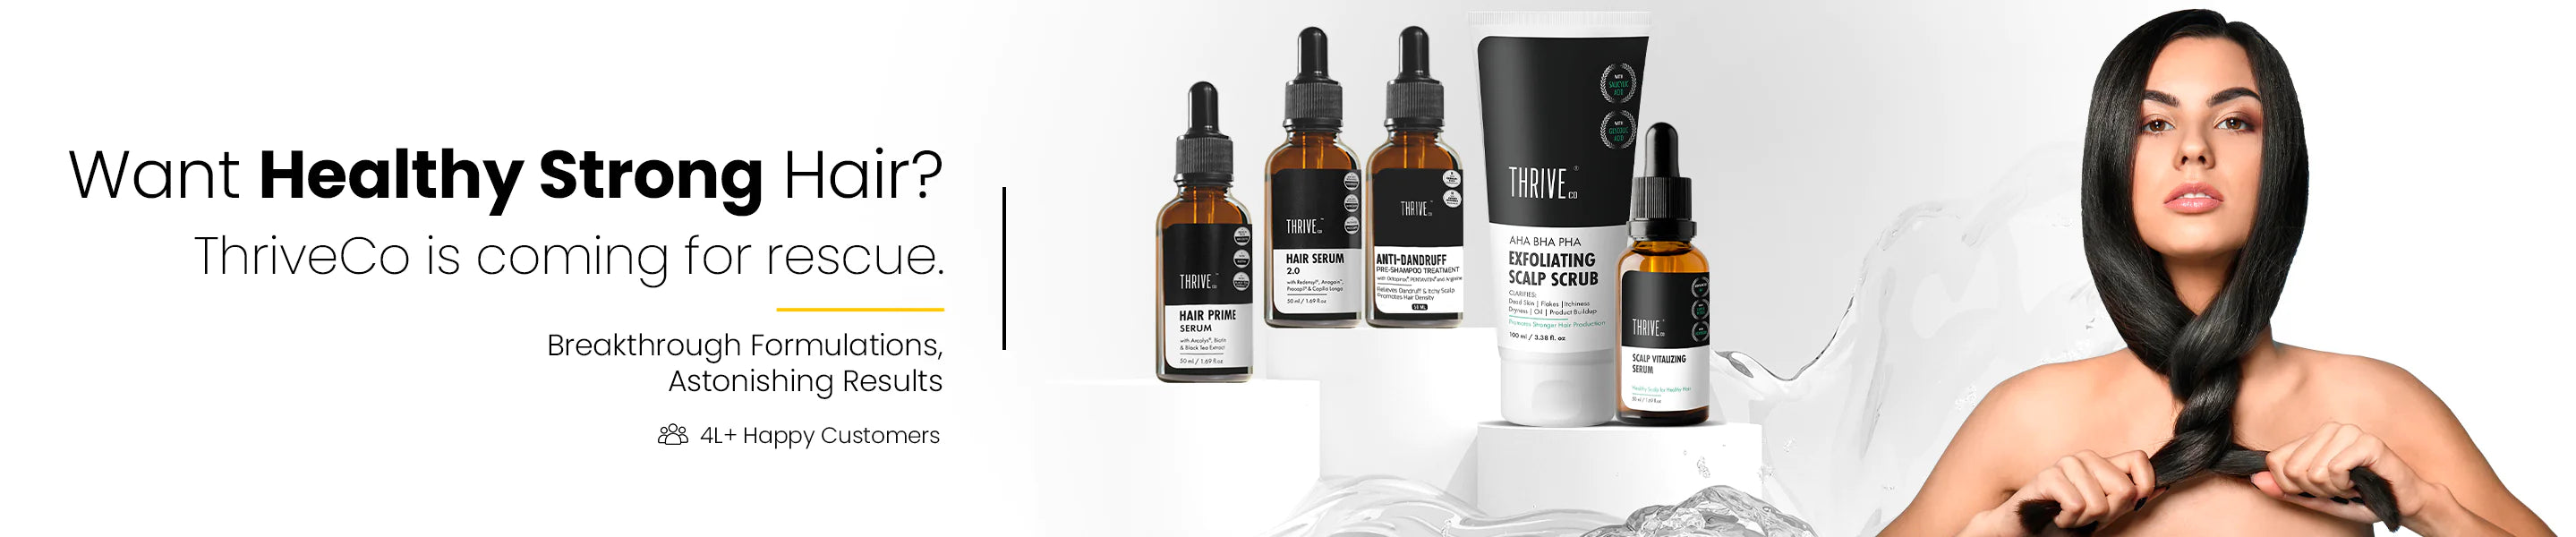 get healthy strong hair with ThriveCo's best hair care products